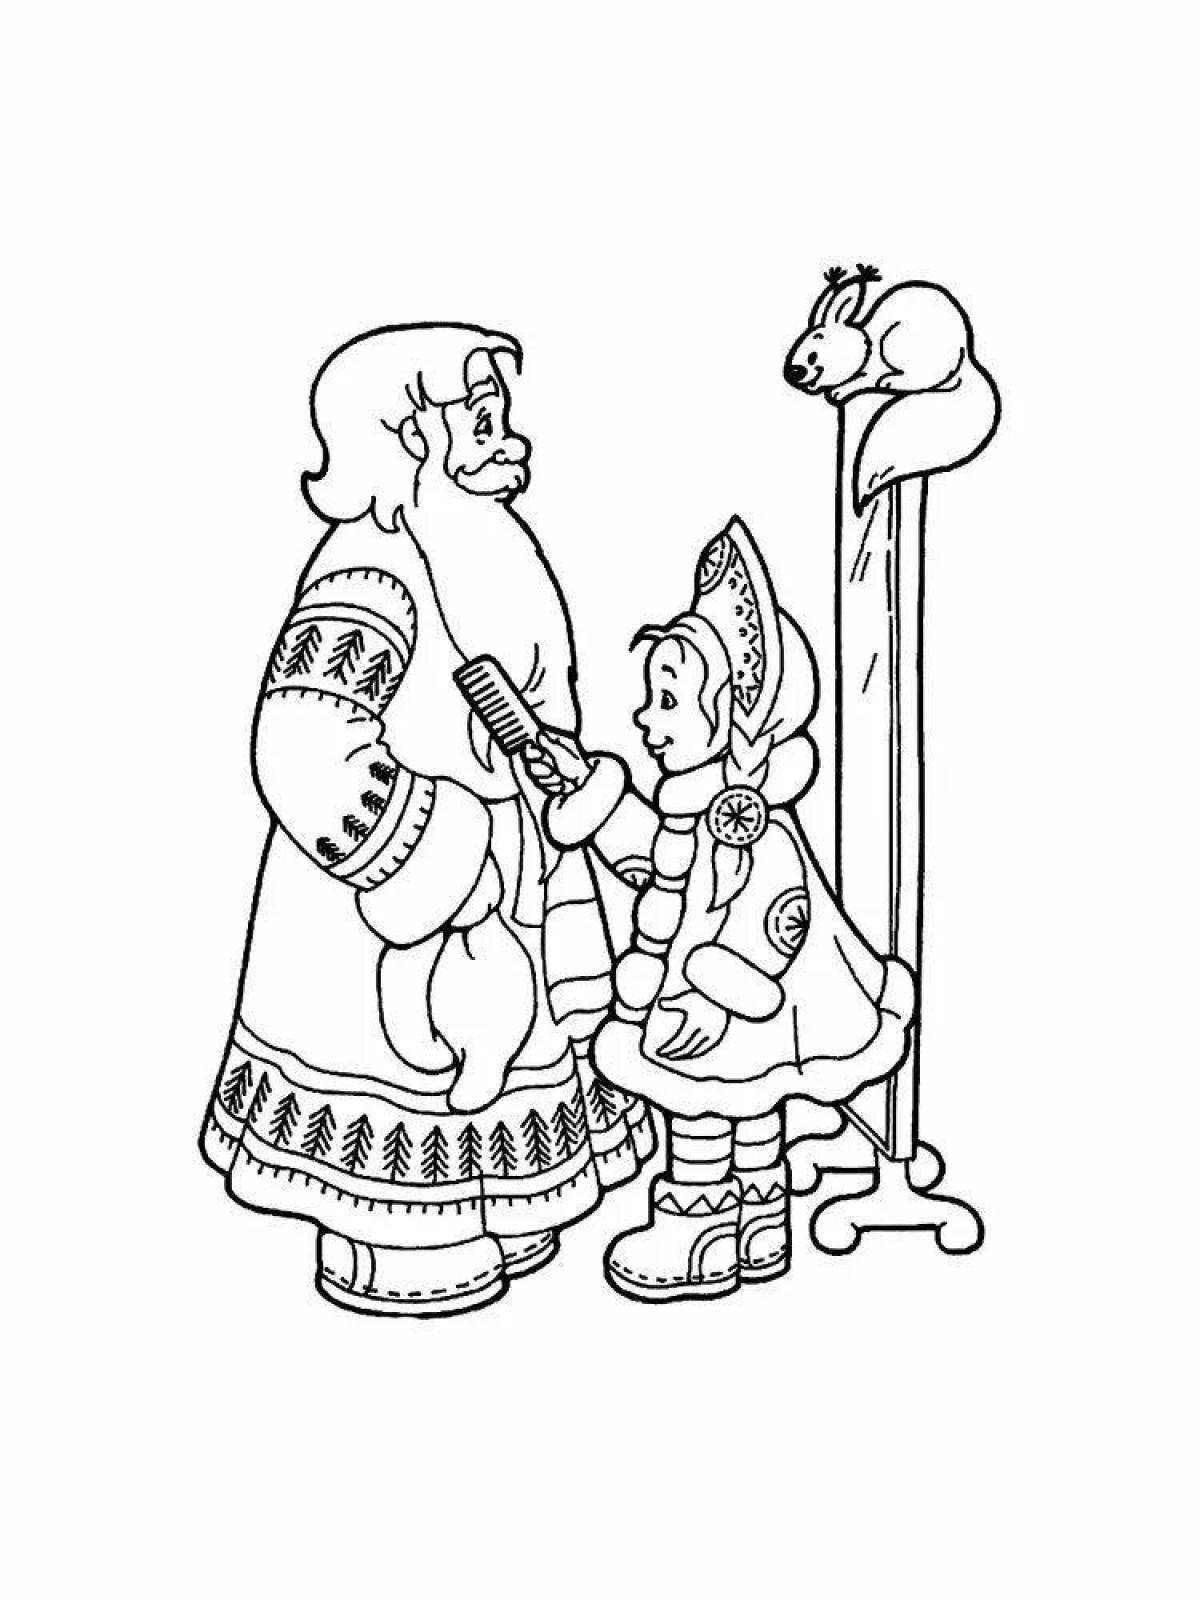 Coloring page graceful frost ivanovich